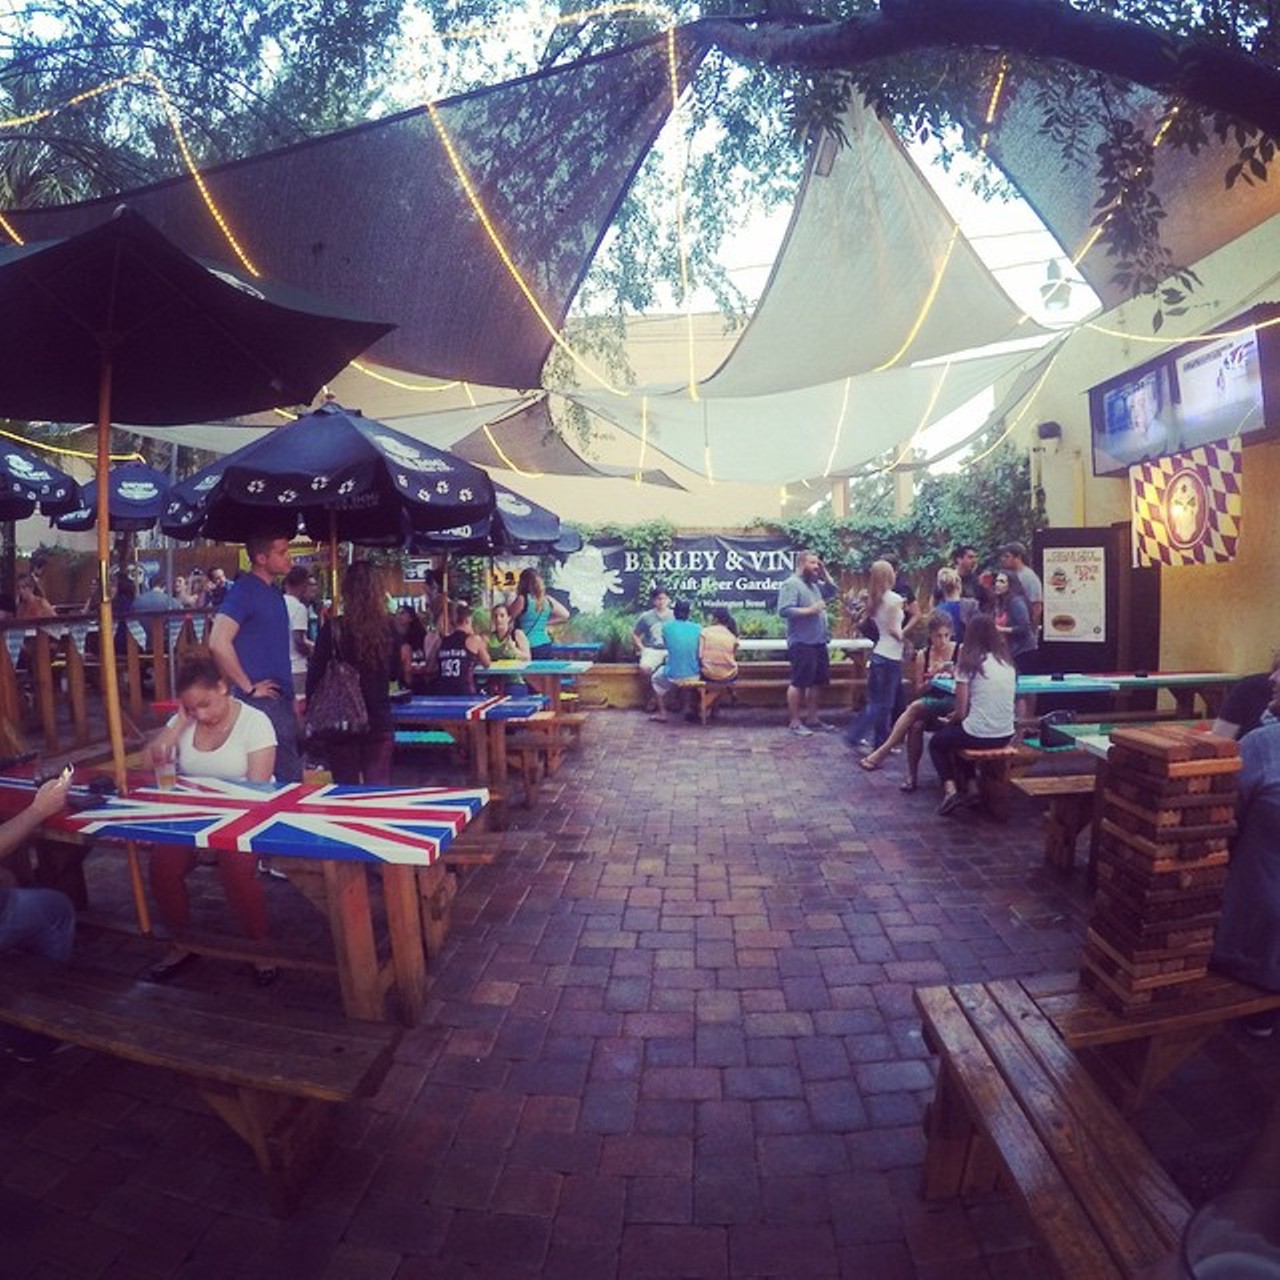 Barley & Vine Biergarten
2406 E. Washington St., 407-930-0960
Monday-Friday, 4 p.m. to 7 p.m.
Over-exasperated workers of Orlando, get your beer here. Almost too appropriately, they&#146;re offering the Founder&#146;s All Day IPA for $3 all day, every day, but also on weekdays from 4 p.m. to 7 p.m., Barley & Vine serves Goose Island Wheat Ale for $3.
Photo via Orlando Weekly